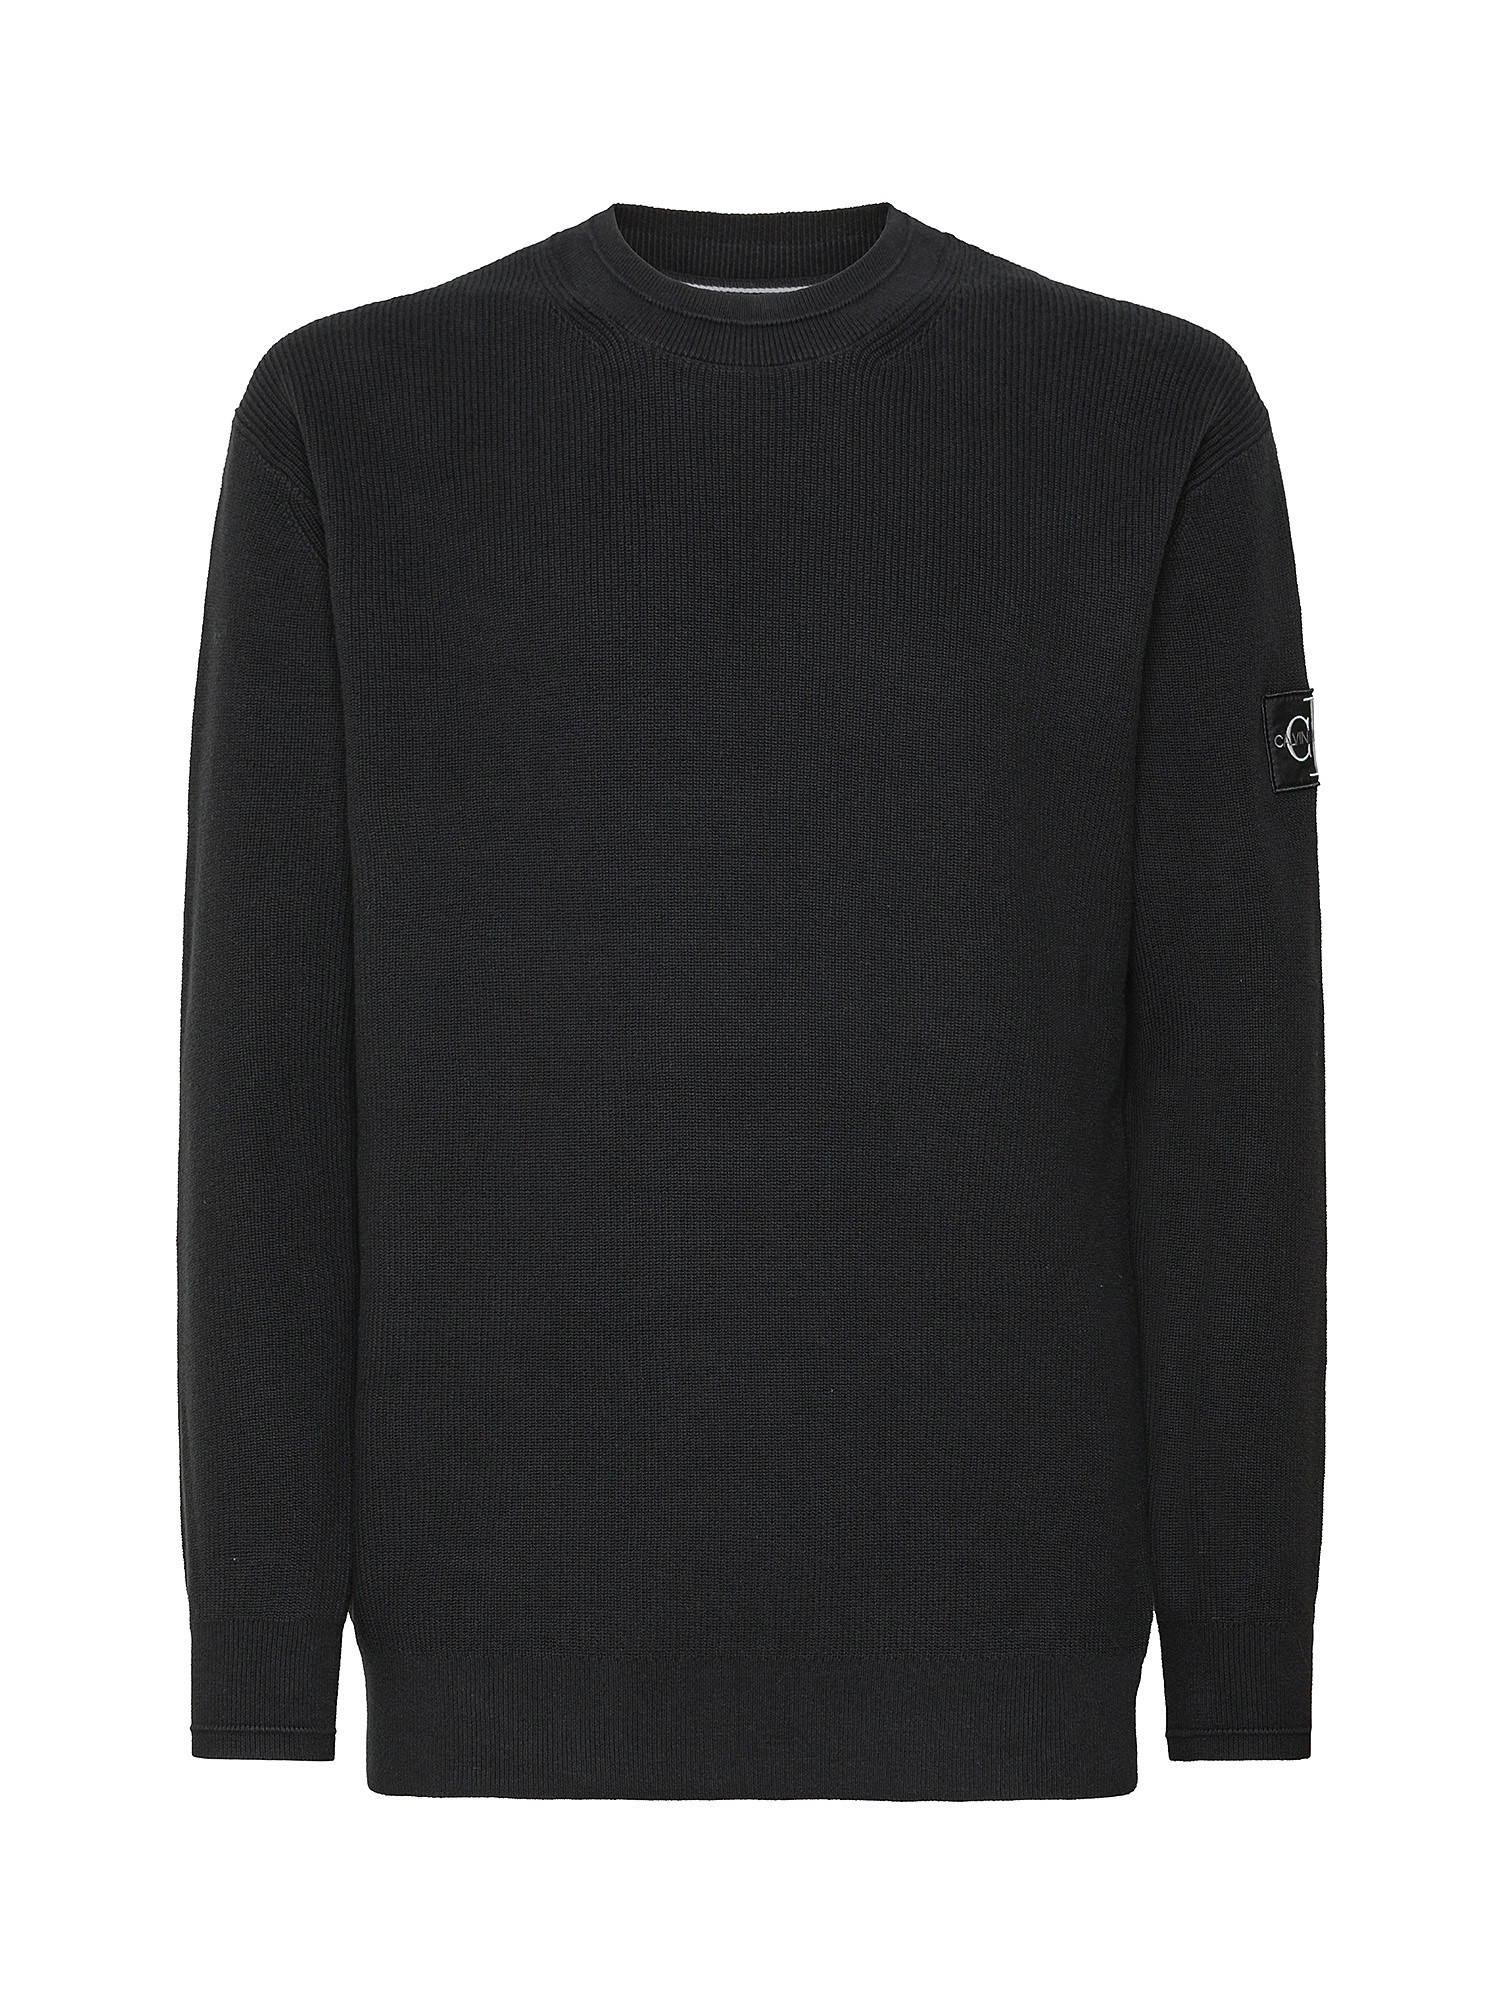 Calvin Klein Jeans -  Pullover a costine in cotone, Nero, large image number 0